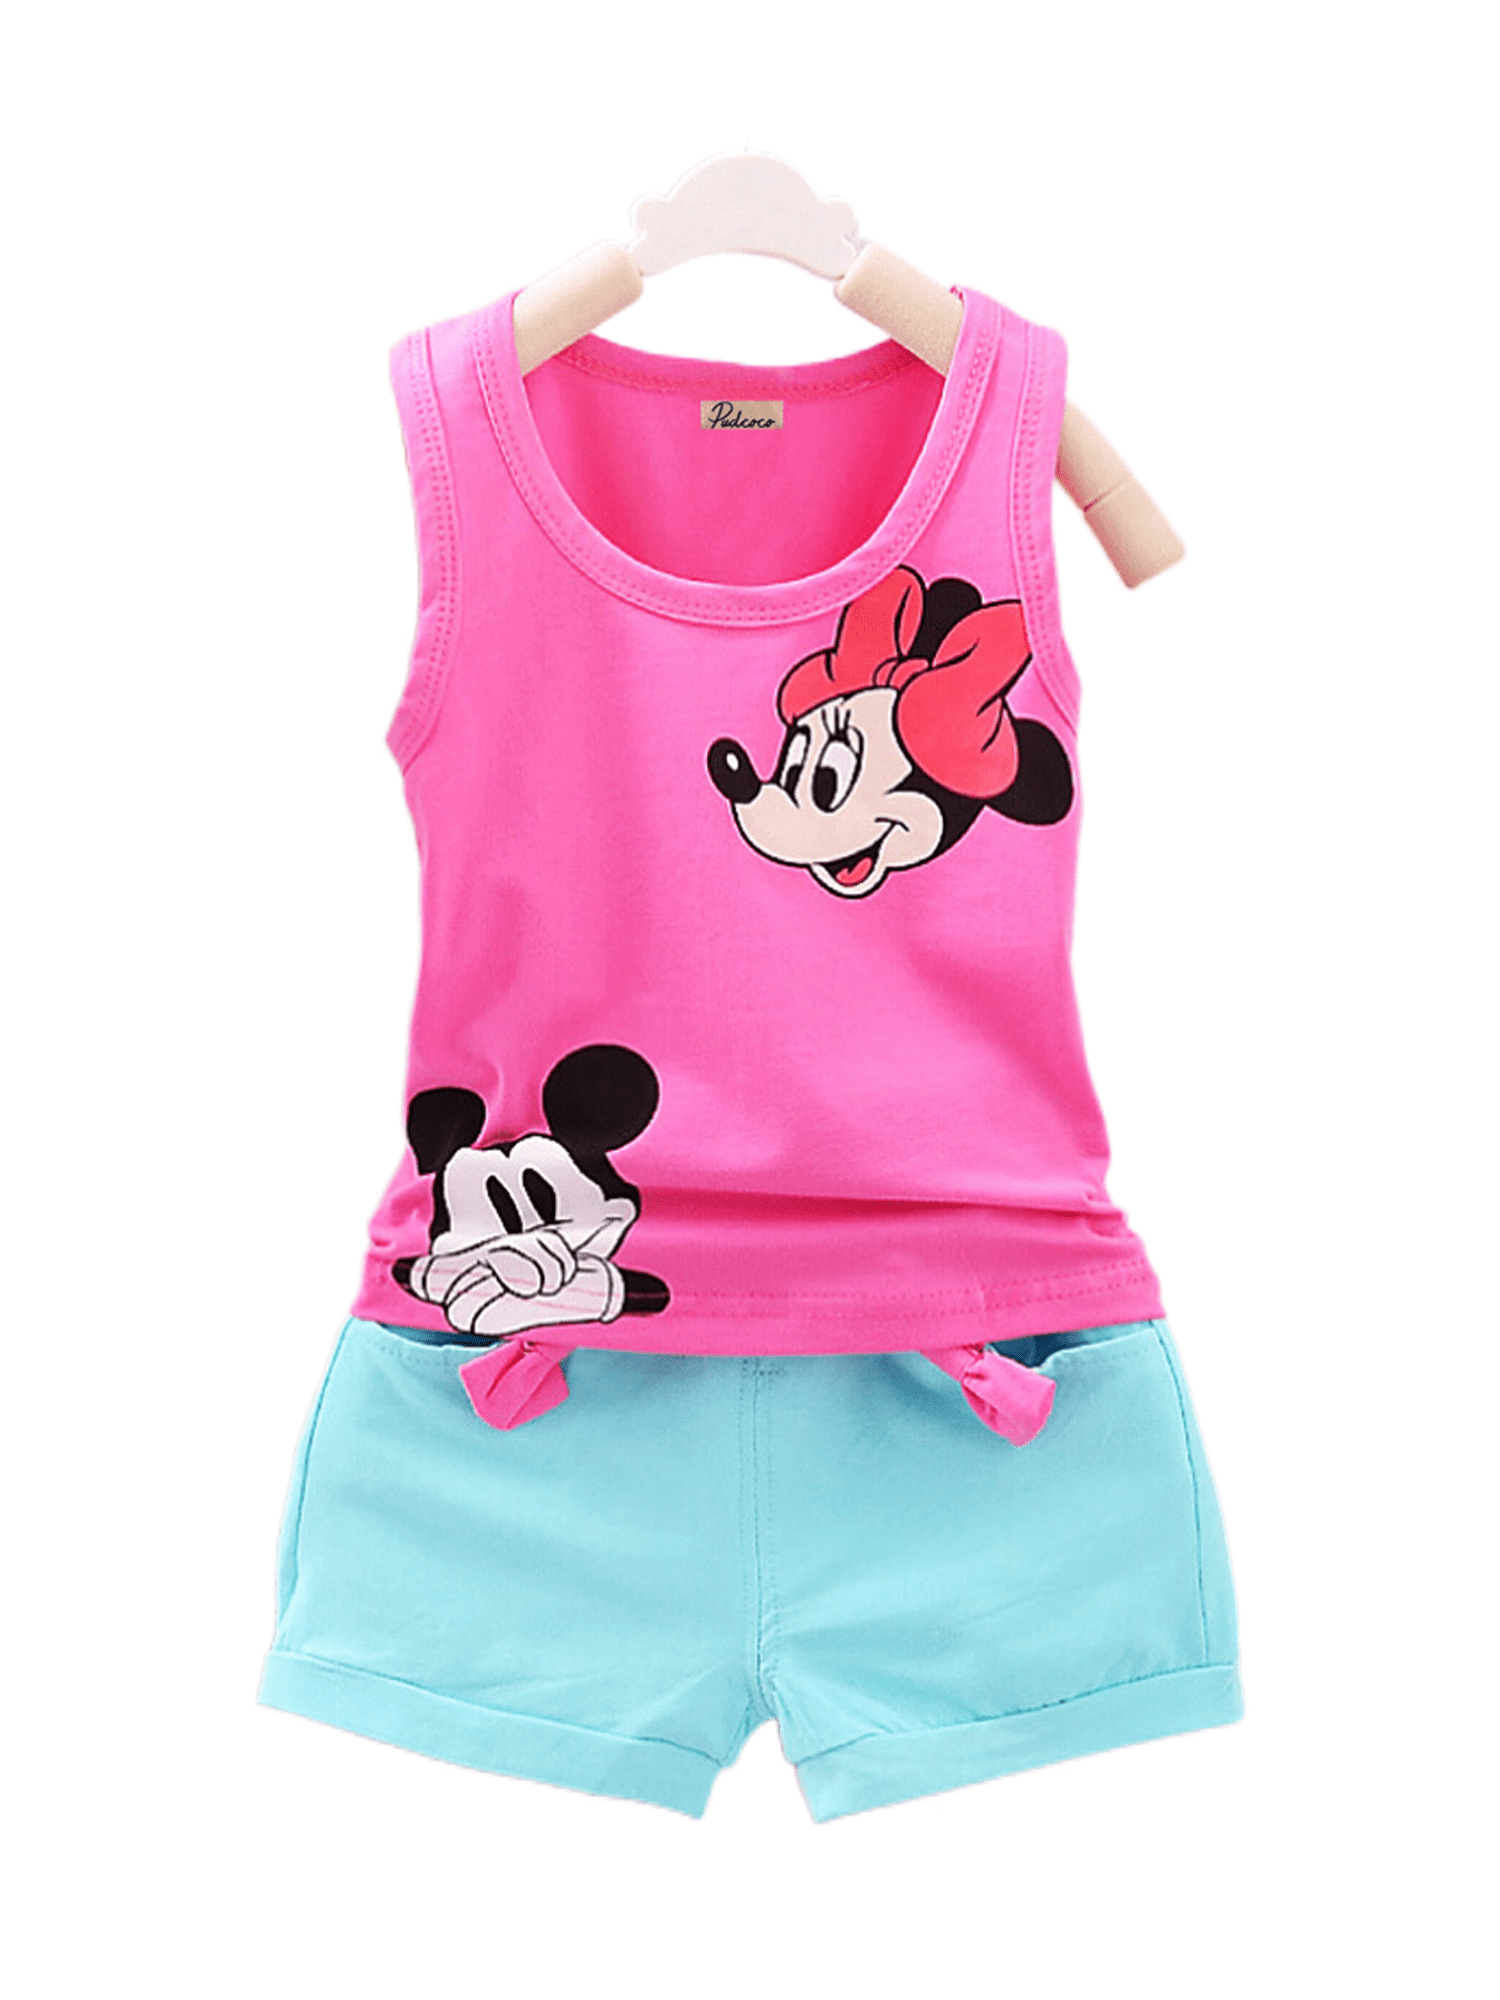 Pudcoco Baby Girl Summer Clothes Set 2 Piece Set Cartoon Minnie Mouse 2-4T Baby 